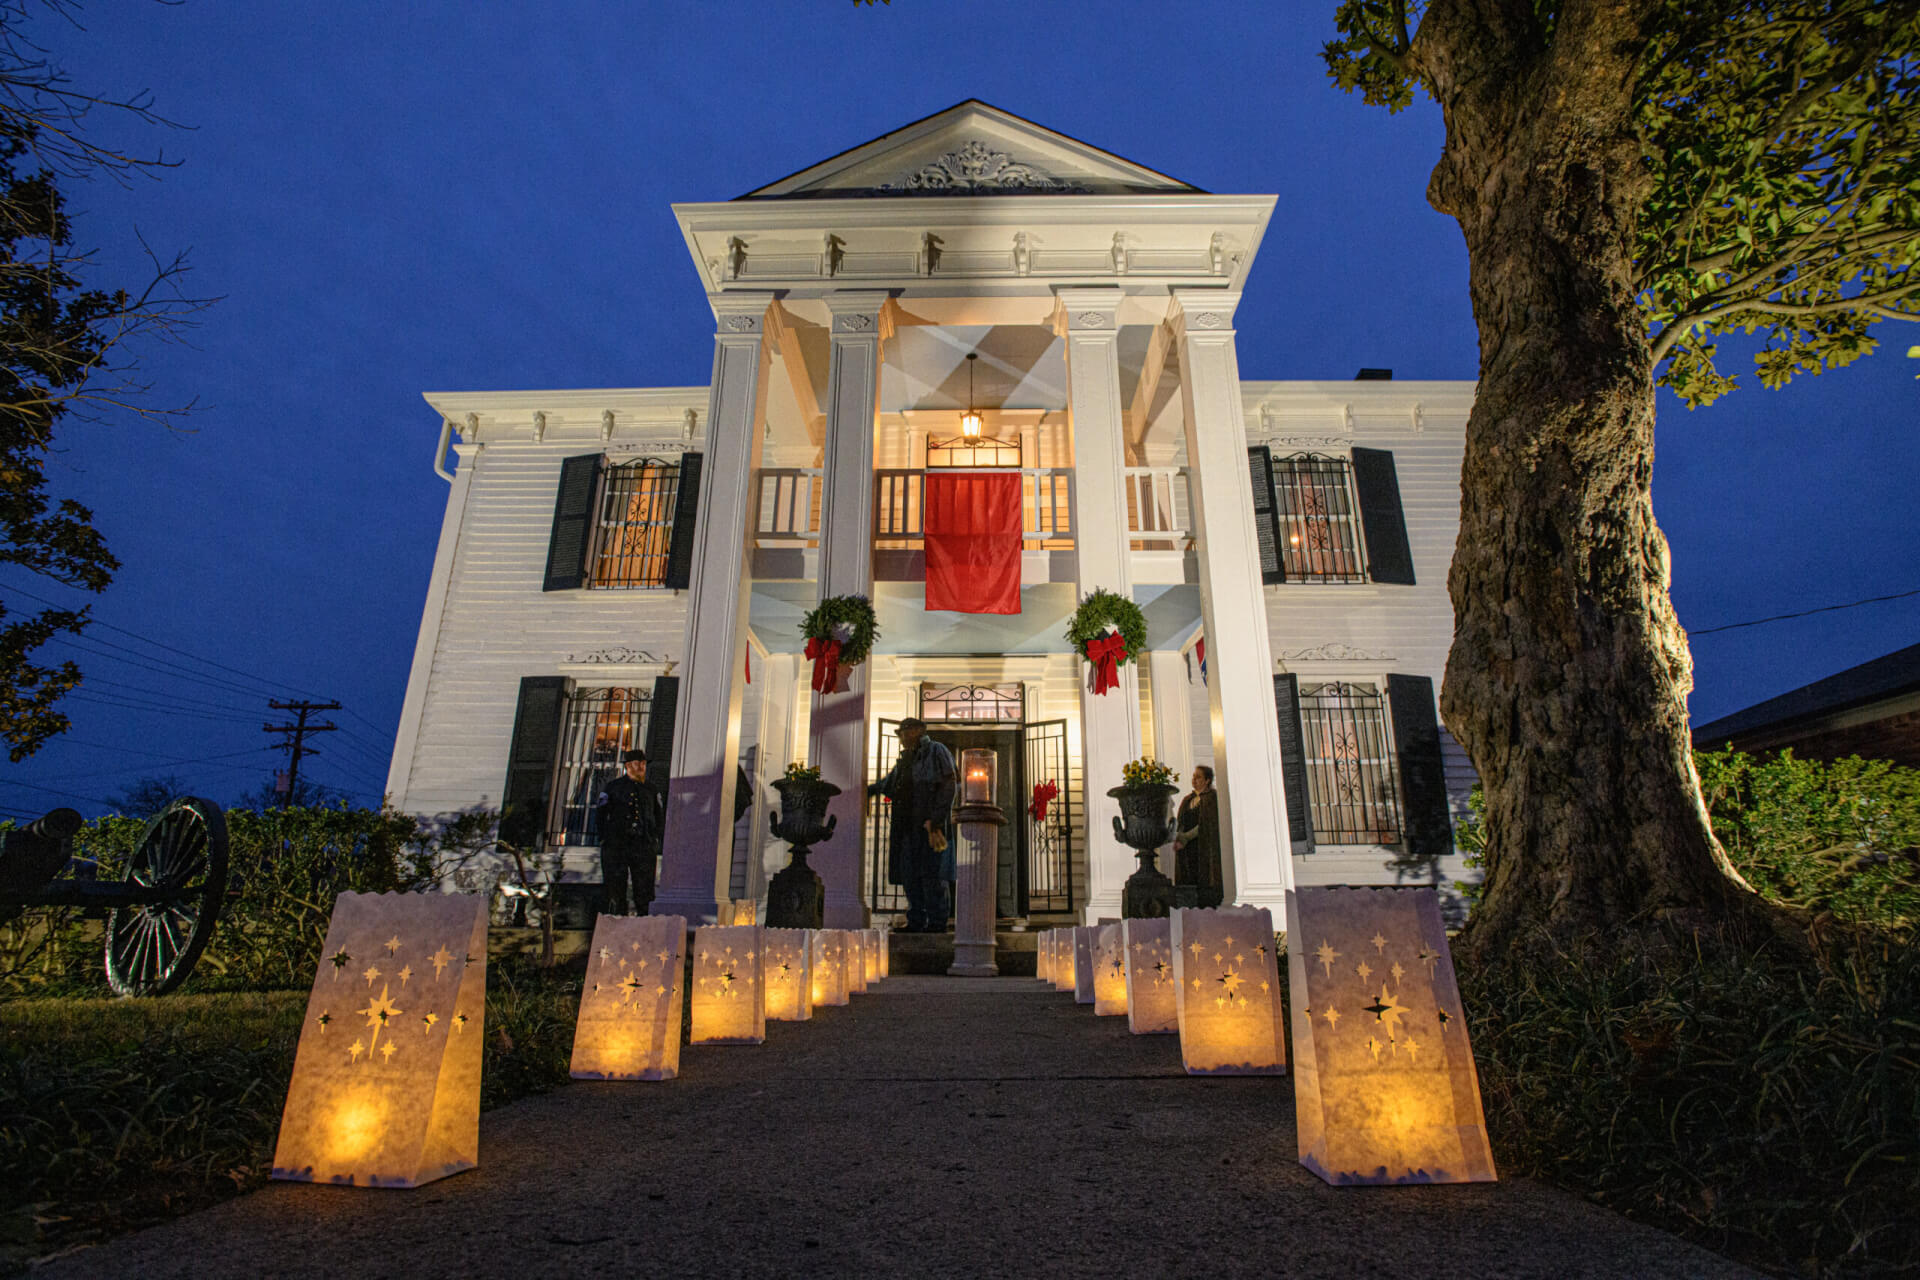 Lotz House Illumination - Lotz House commemorated the 159th Anniversary of the Battle of Franklin with Illumination